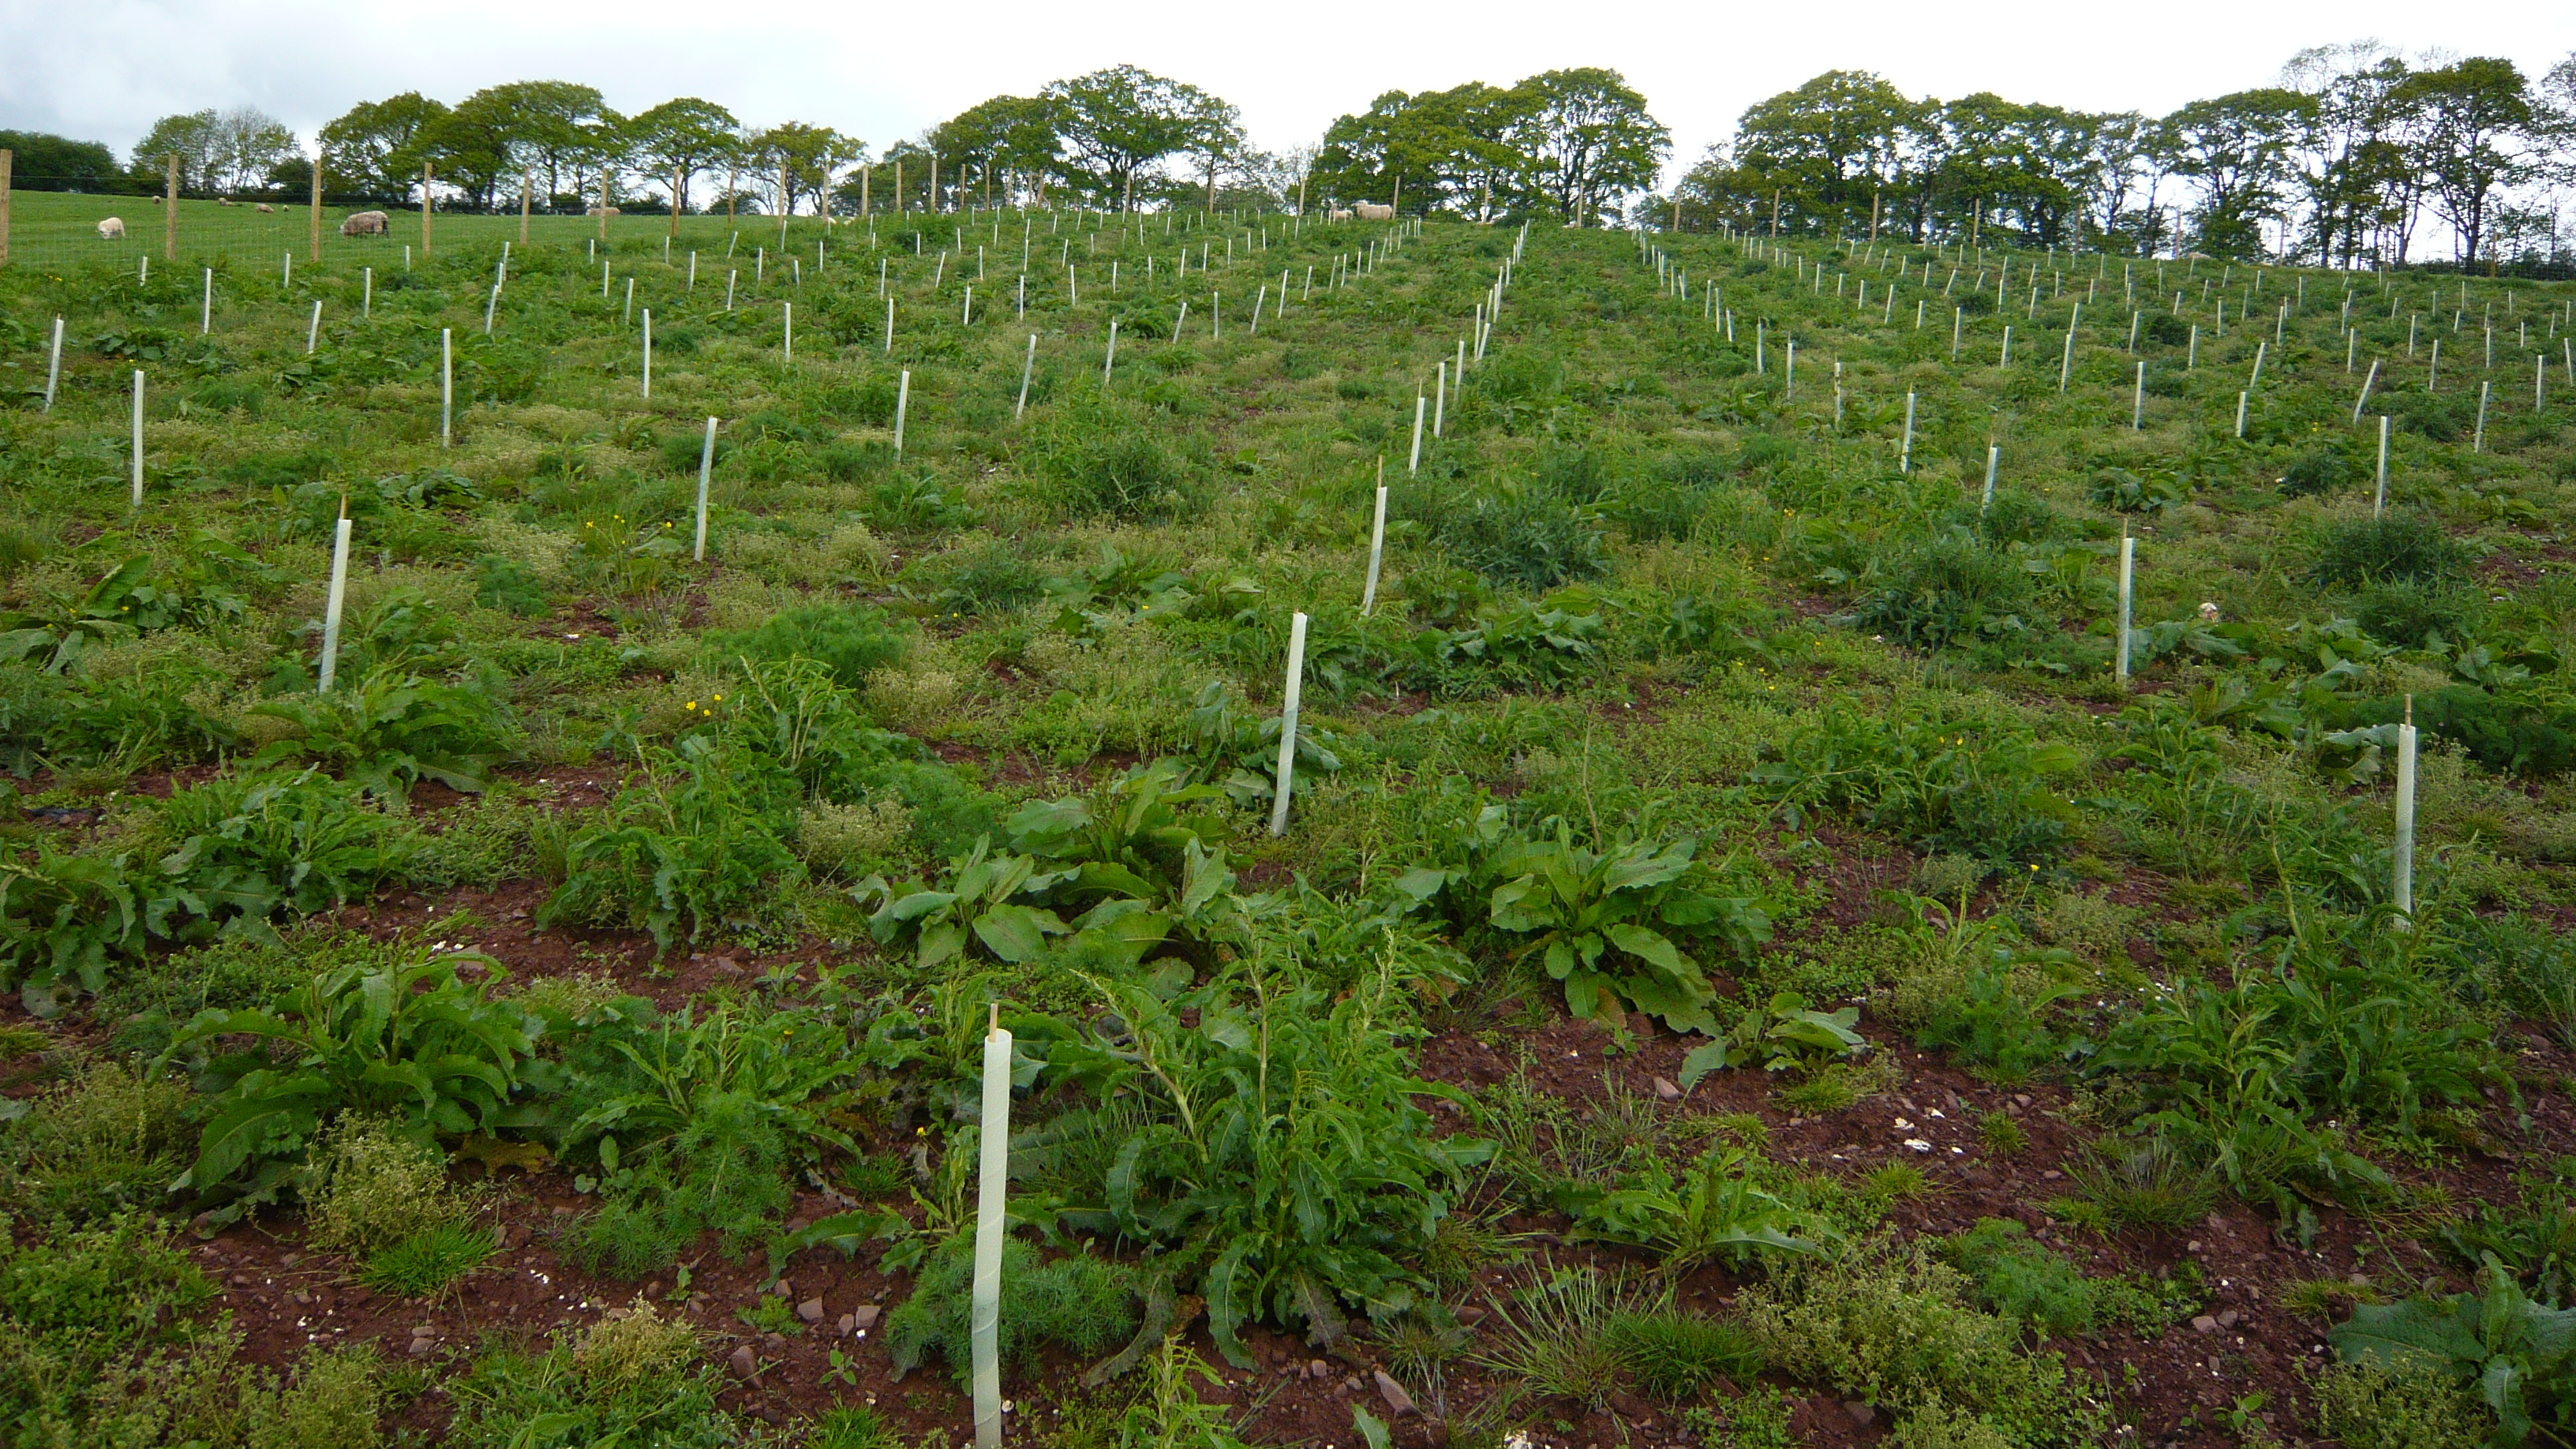 New trees planted in rows 